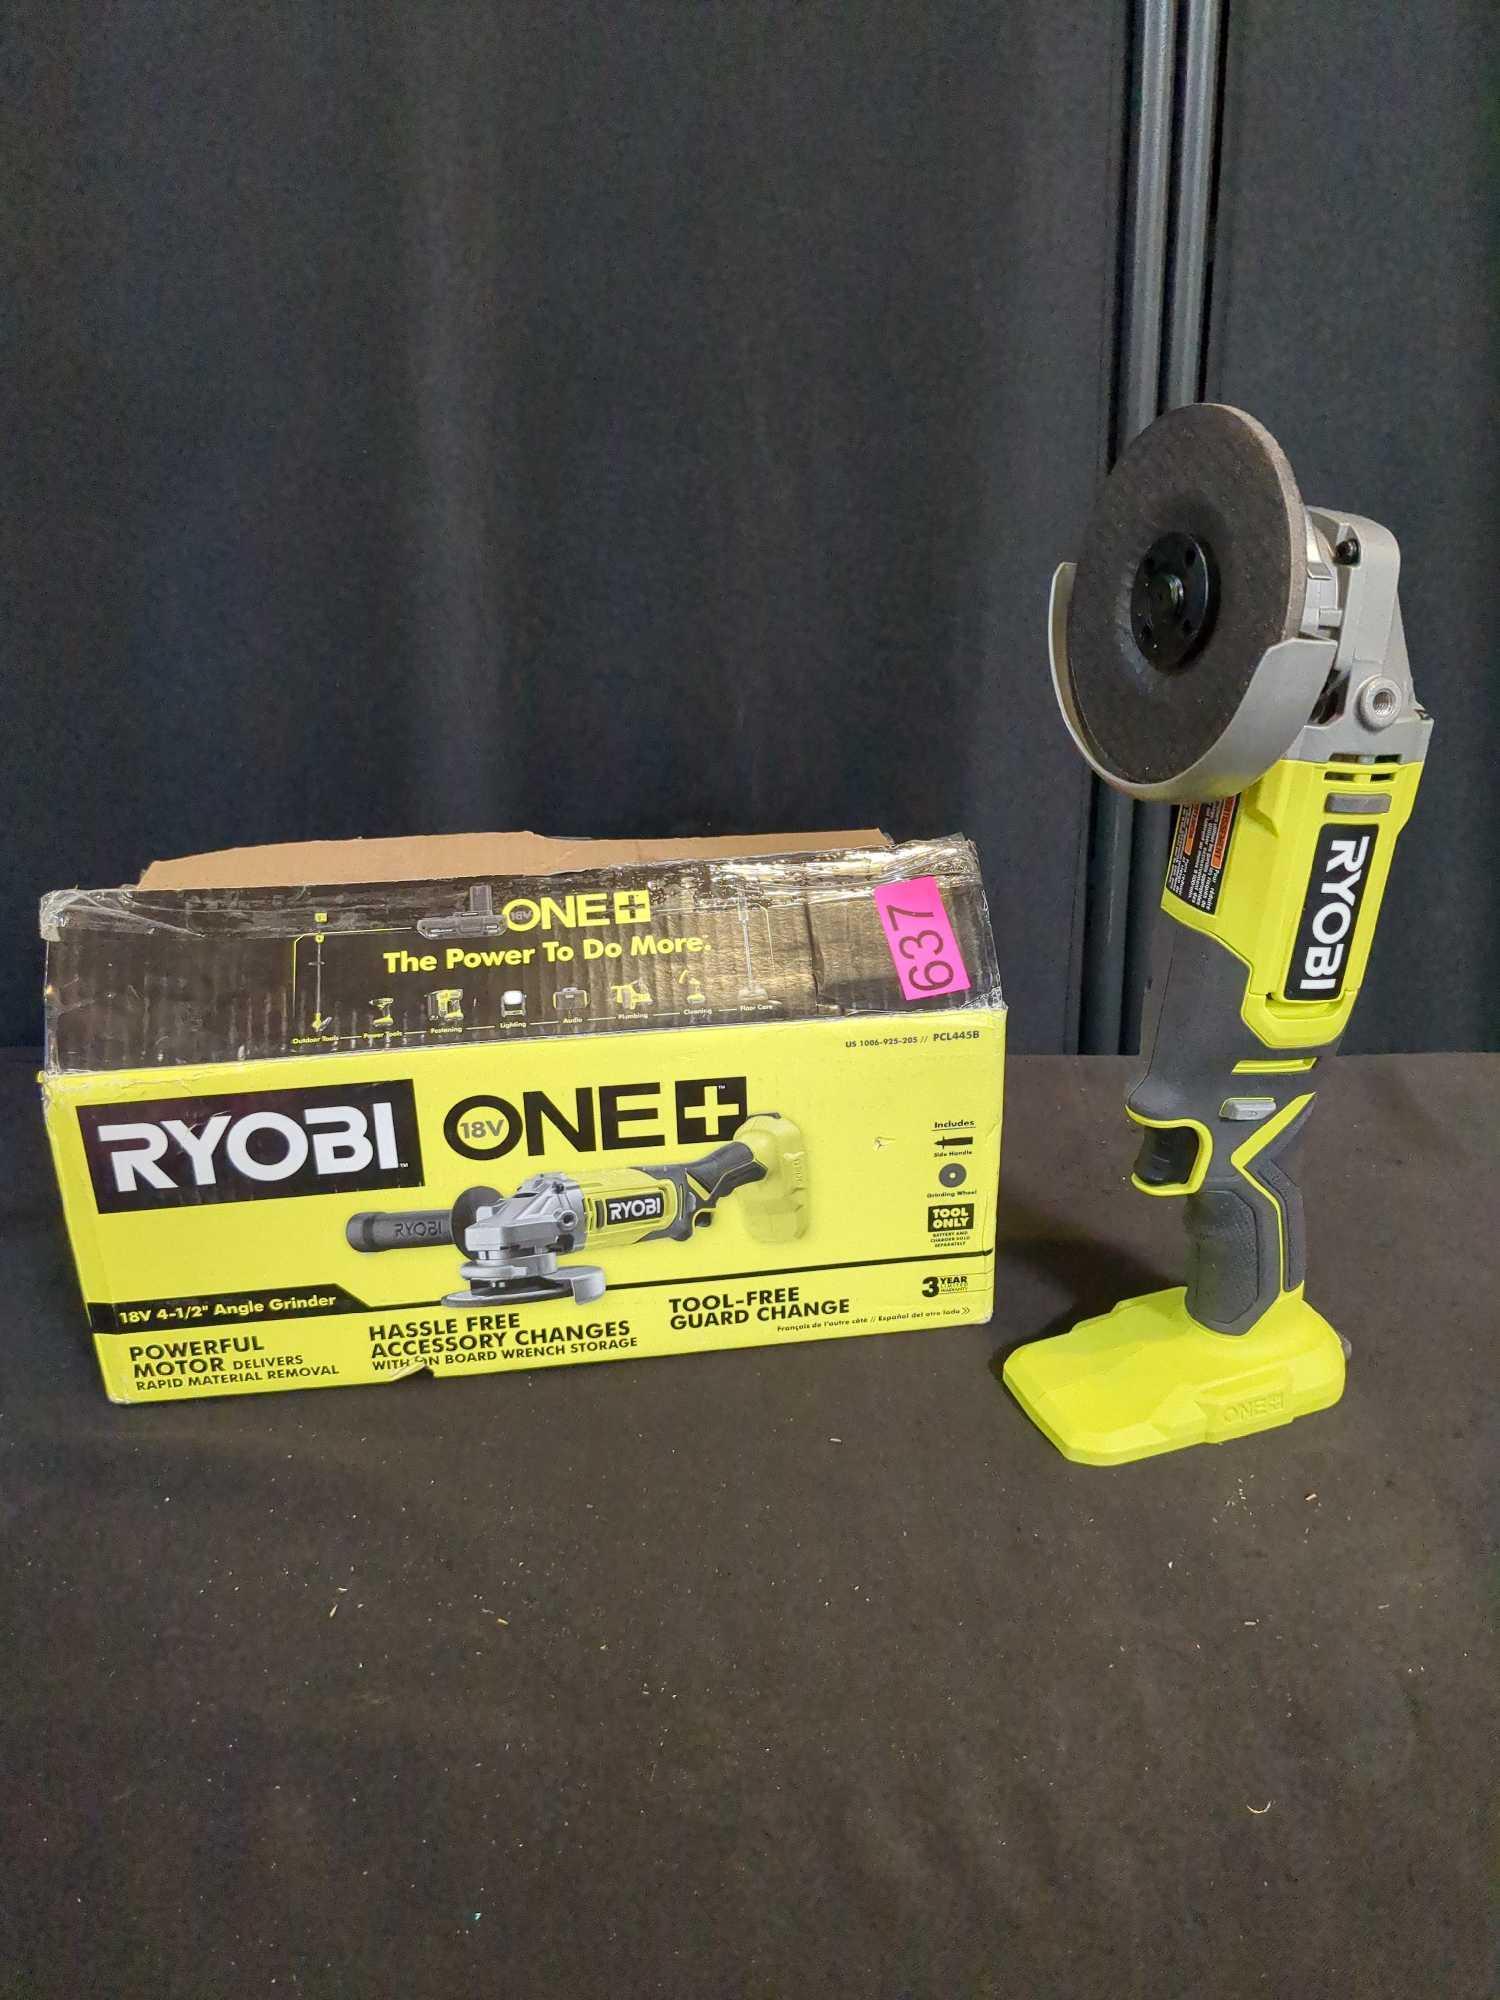 RYOBI ONE+ 18V Cordless 4-1/2 in. Angle Grinder (Tool Only